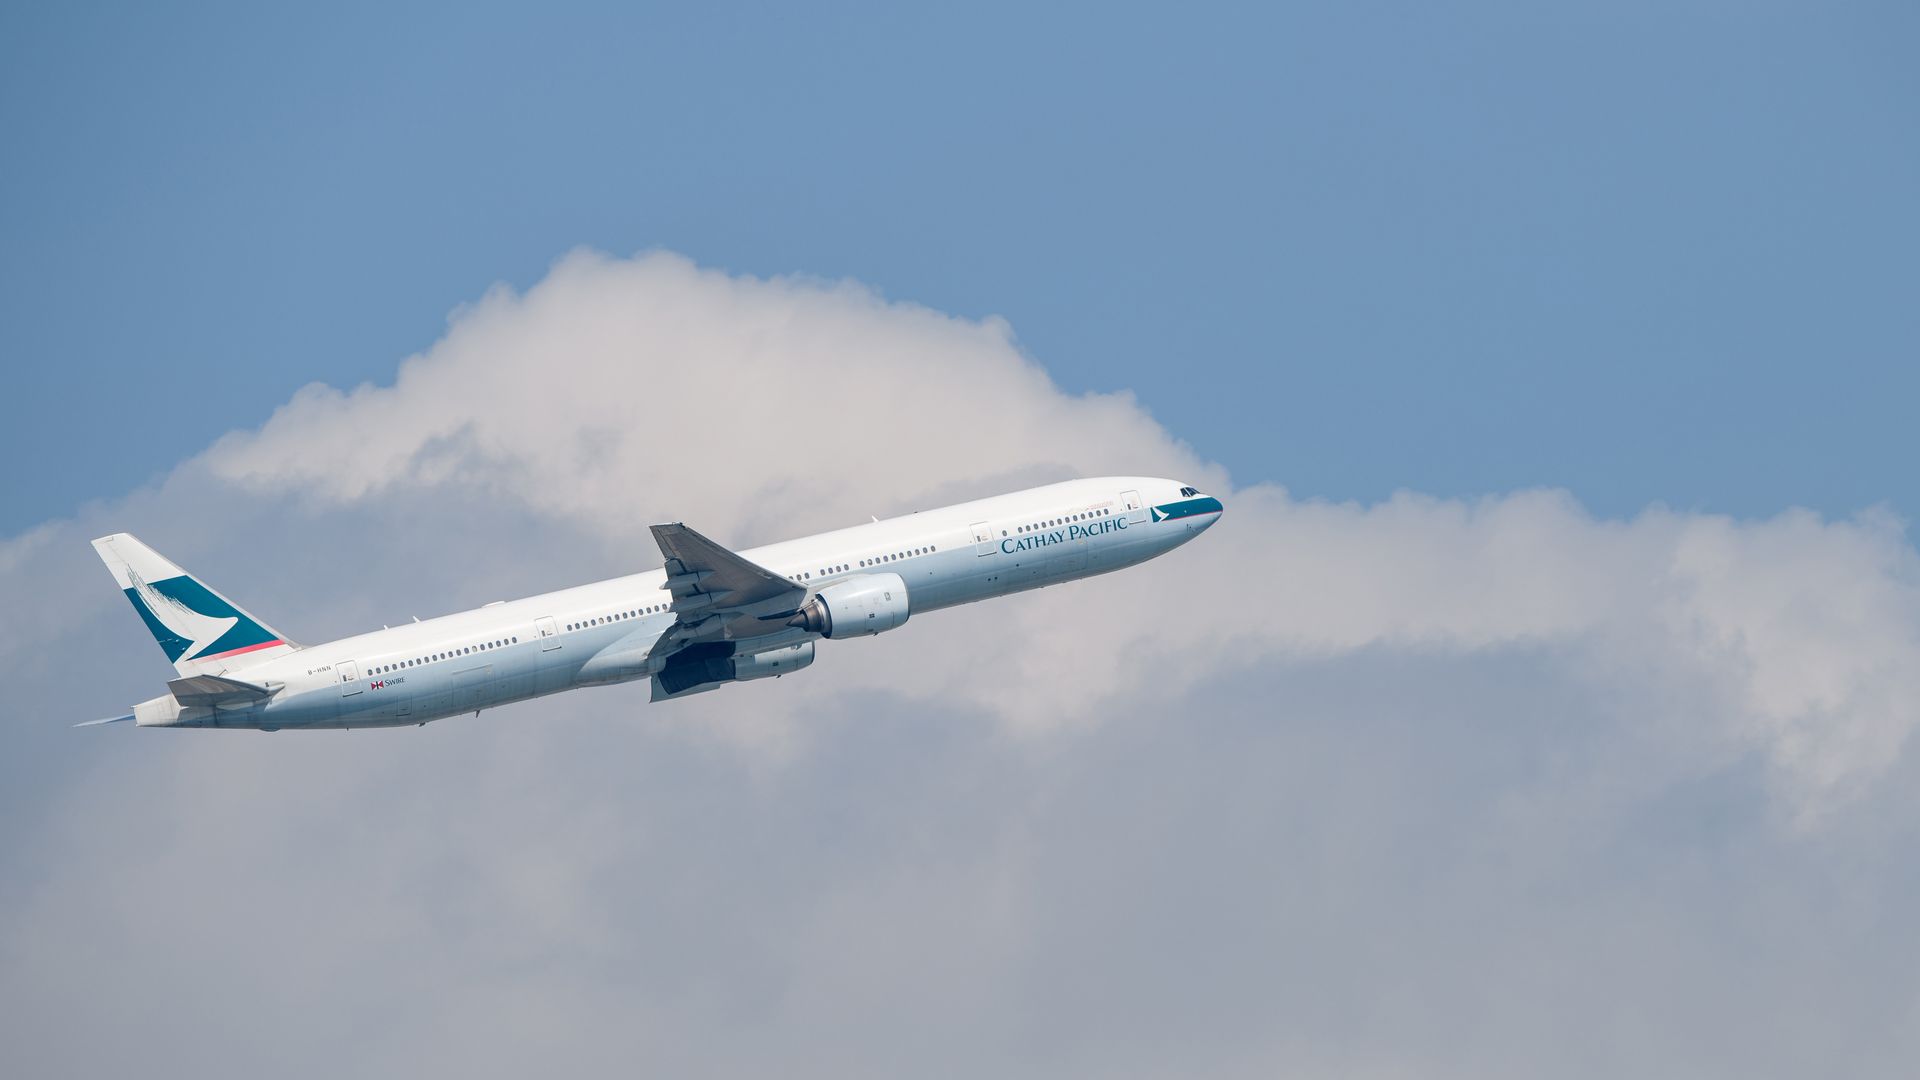 Cathay Pacific airliner